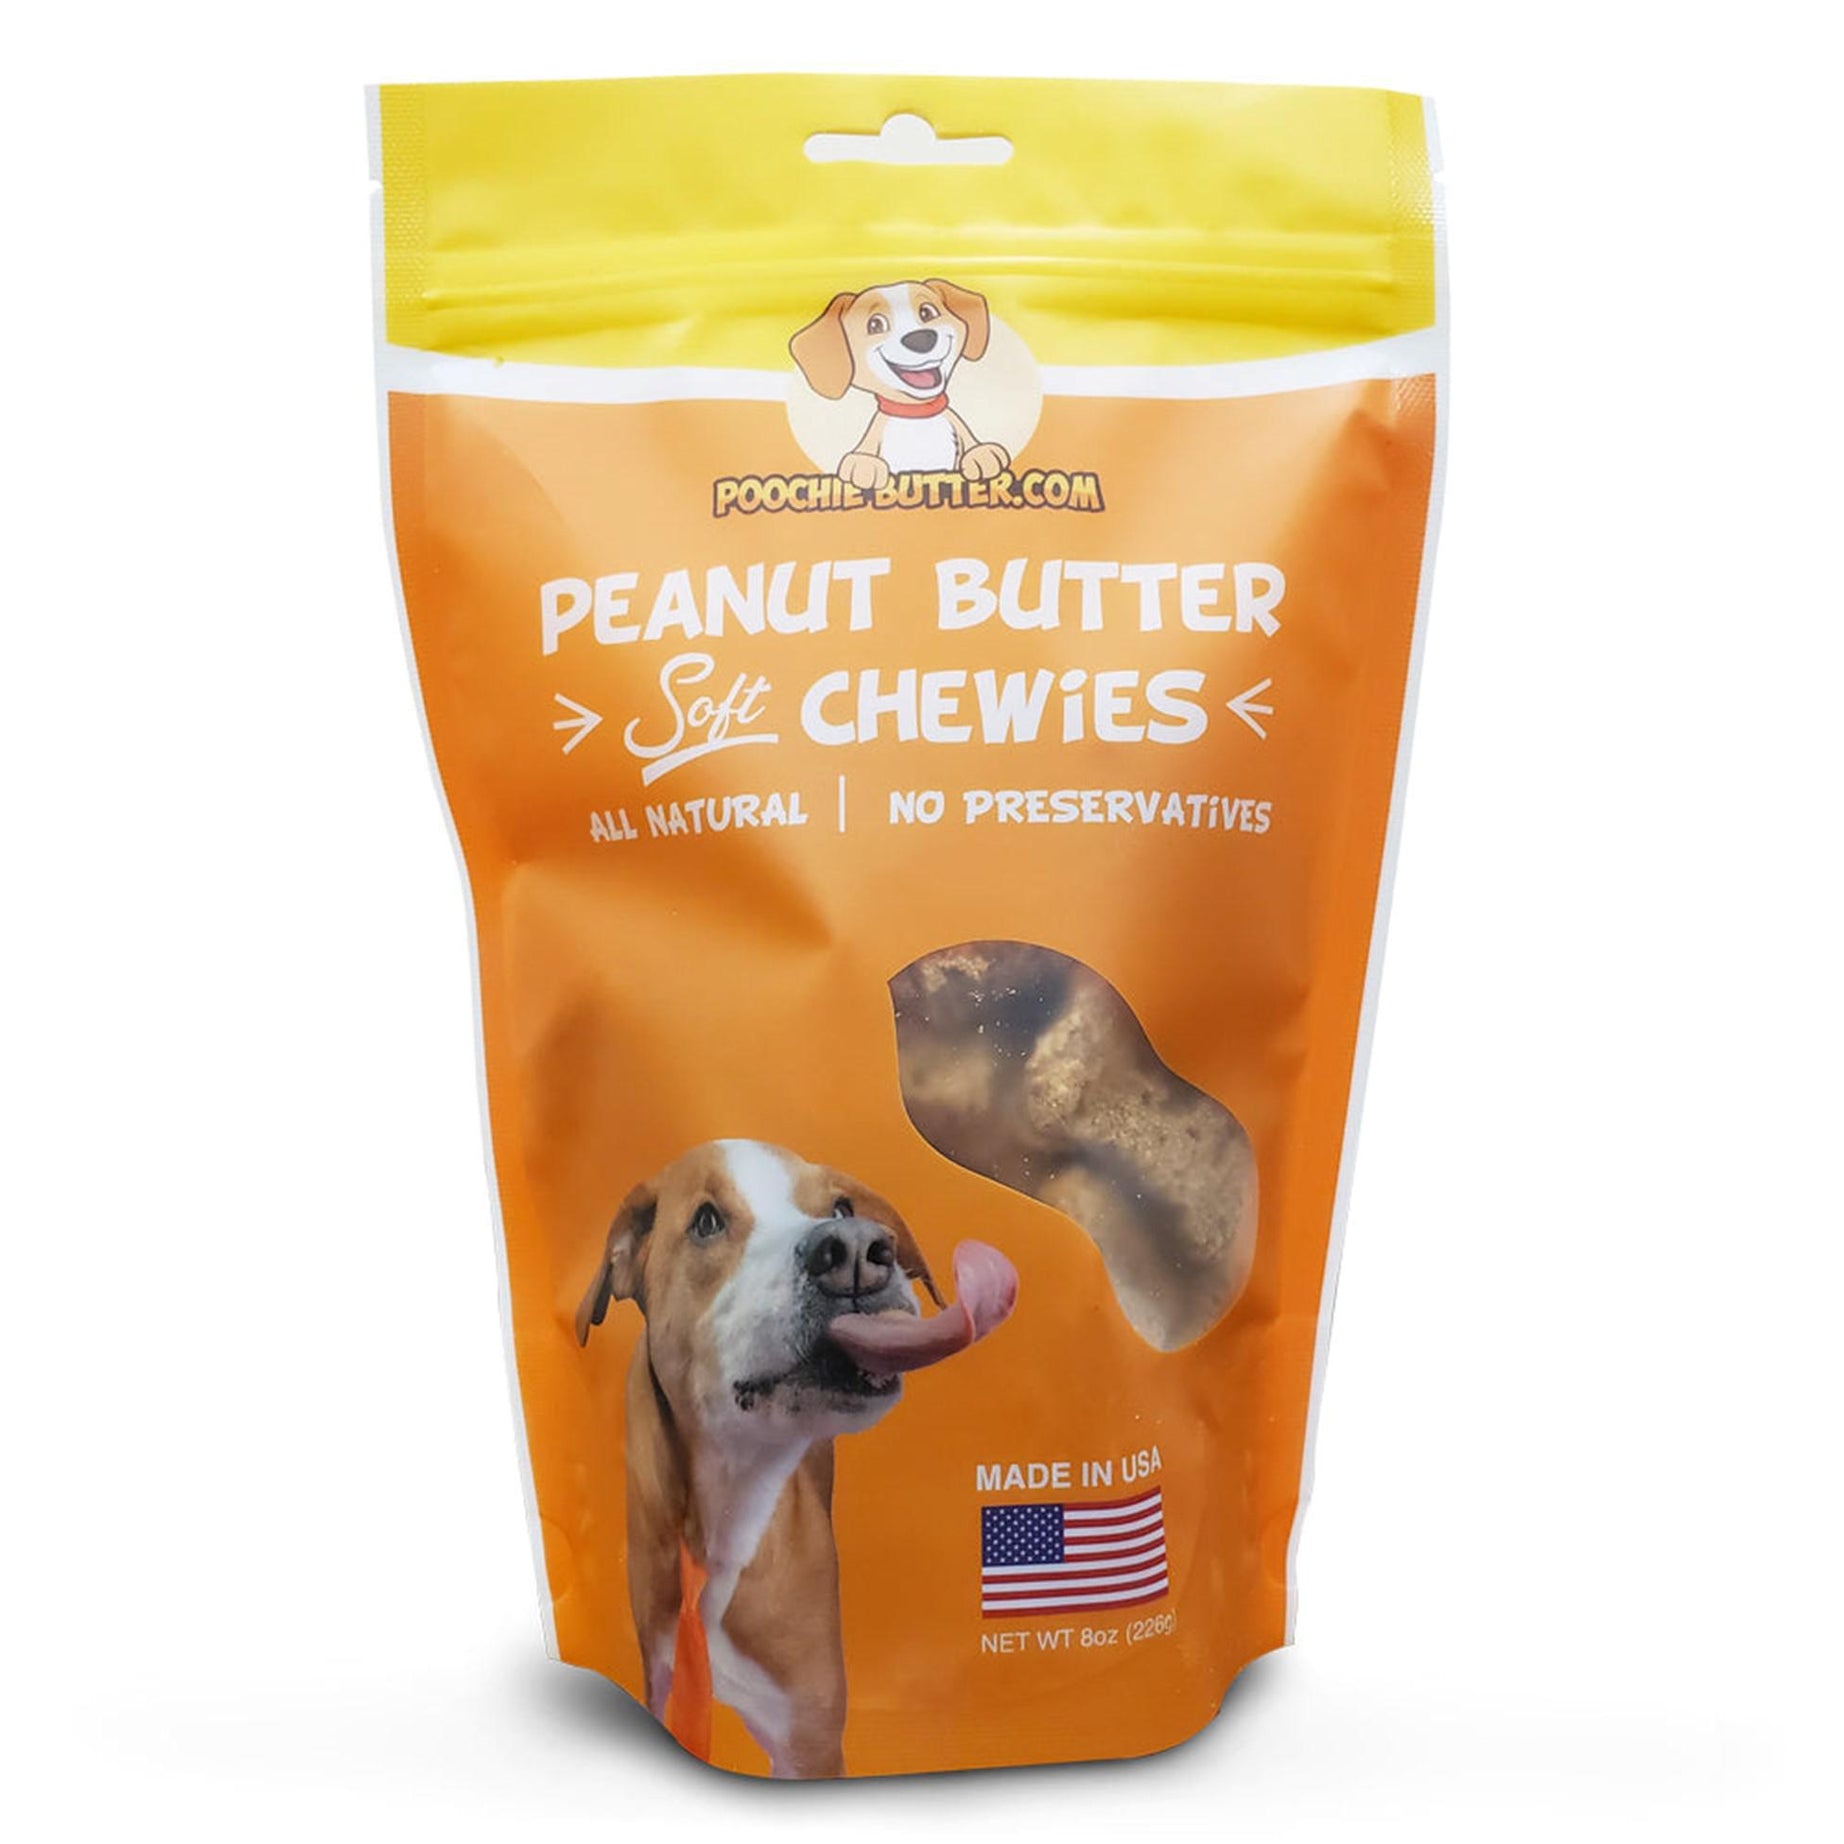 Dilly's Poochie Butter - Peanut Butter Soft Chews